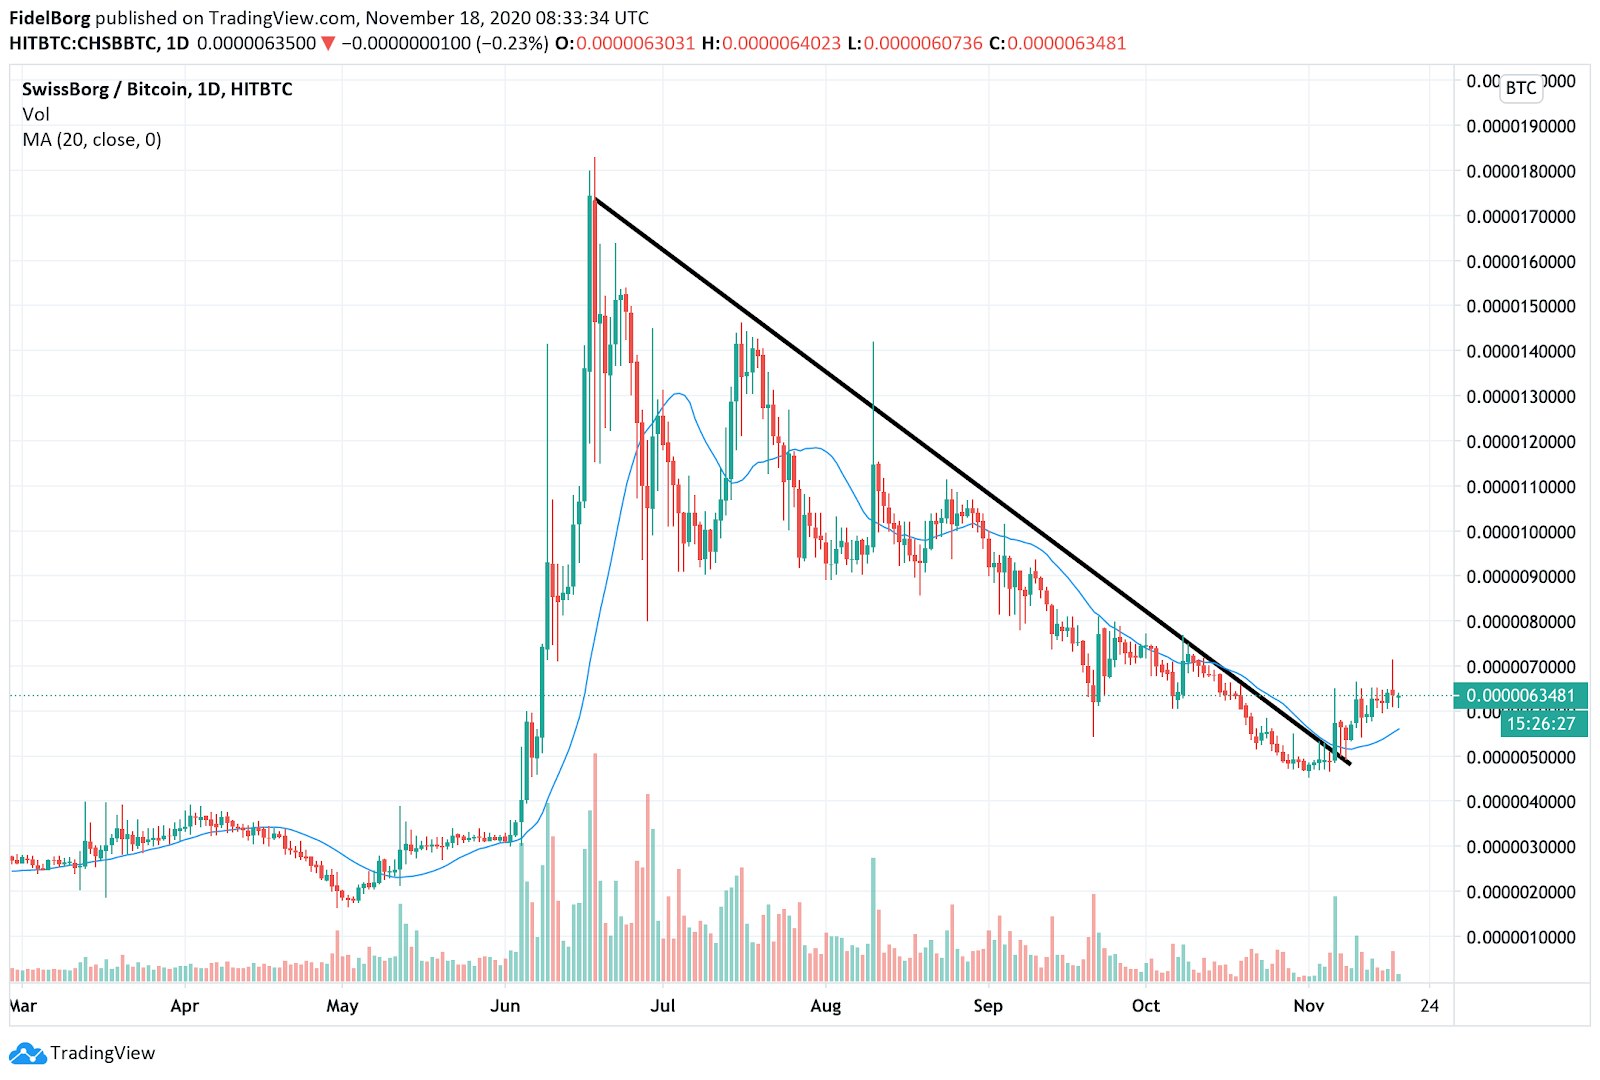 CHSB/BTC (daily): 20 days moving average, volume bars and downtrend line marked in black (Source: tradingview.com)